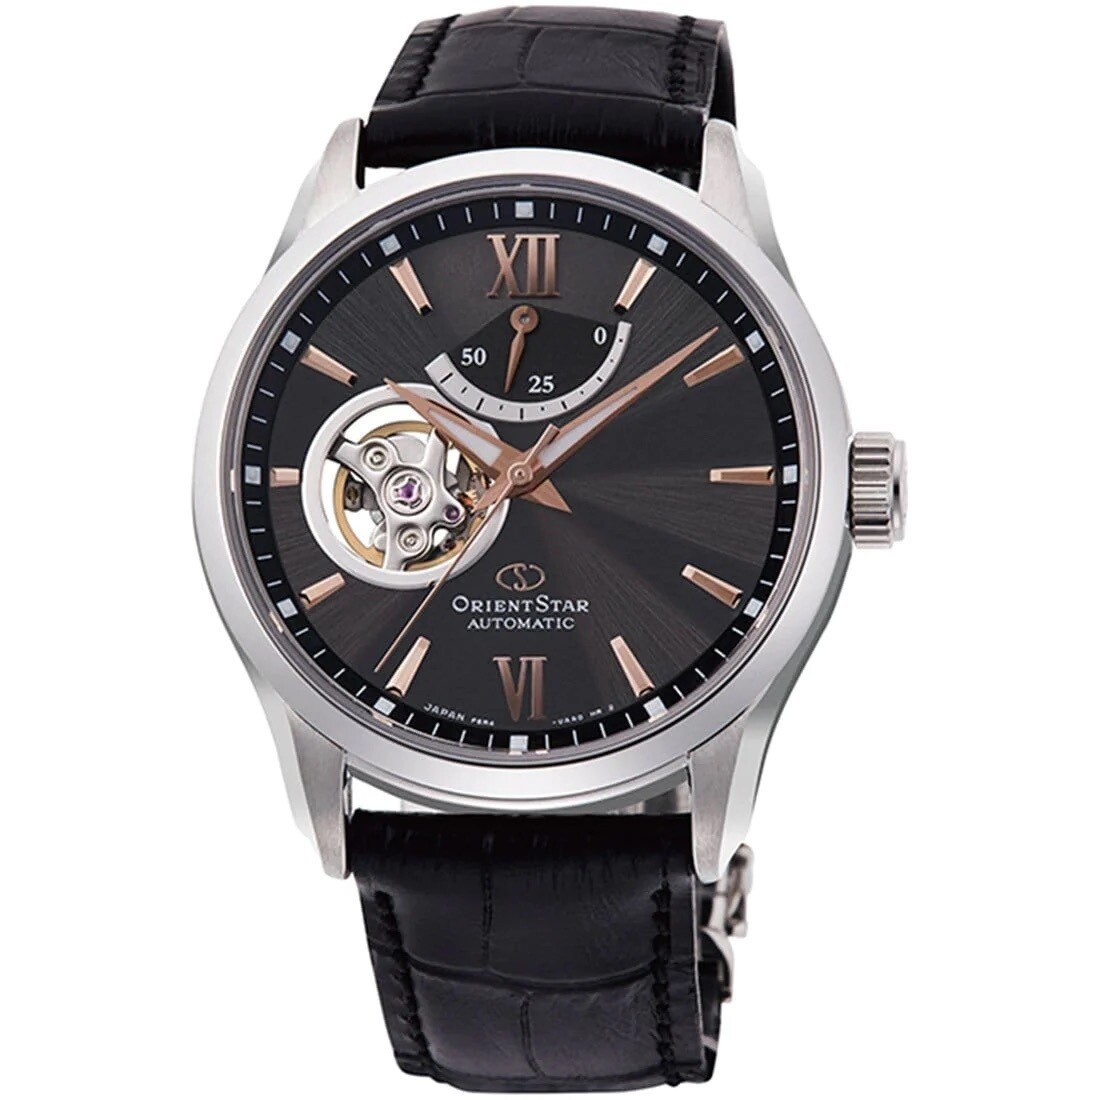 Orient Star RE-AT0007N Open Heart 39.3mm 100m WR sapphire crystal automatic men’s watch leather band